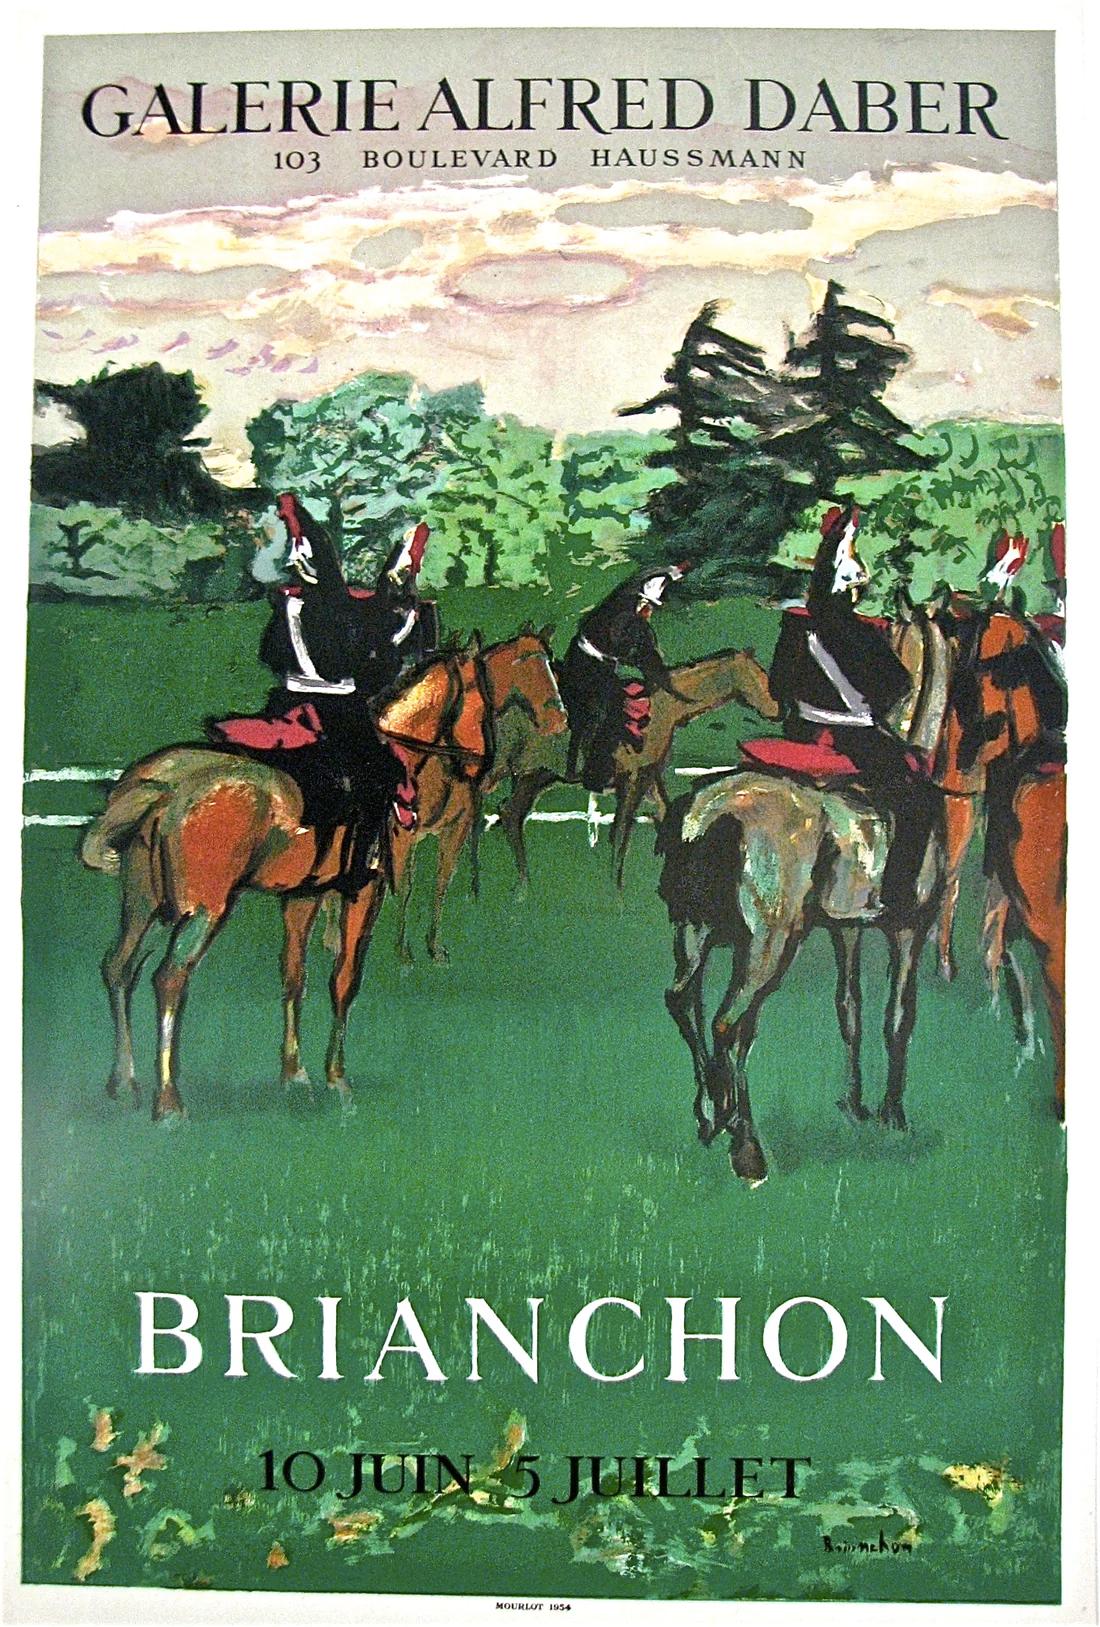 Artist: Maurice Brianchon

Medium: Lithographic Poster, 1954

Dimensions: 23.3 x 16 in / 59.2 x 40.6 cm

Classic Poster Paper - Perfect Condition A+

This original lithographic poster by French artist Maurice Brianchon (1899-1979) was created